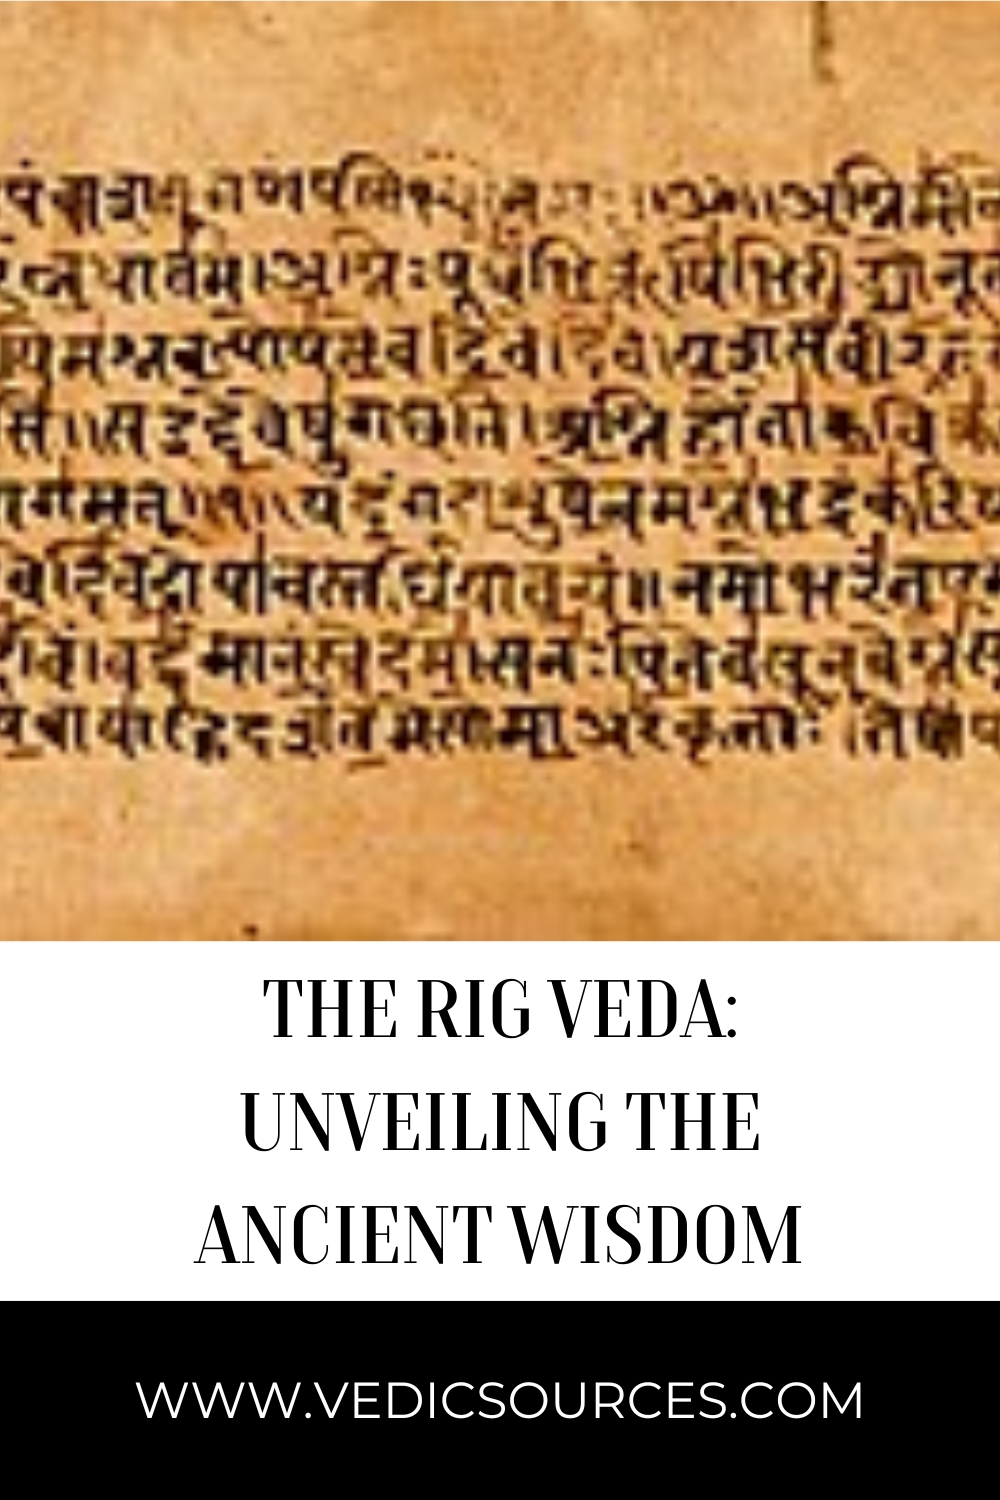 The Rig Veda: Unveiling the Ancient Wisdom